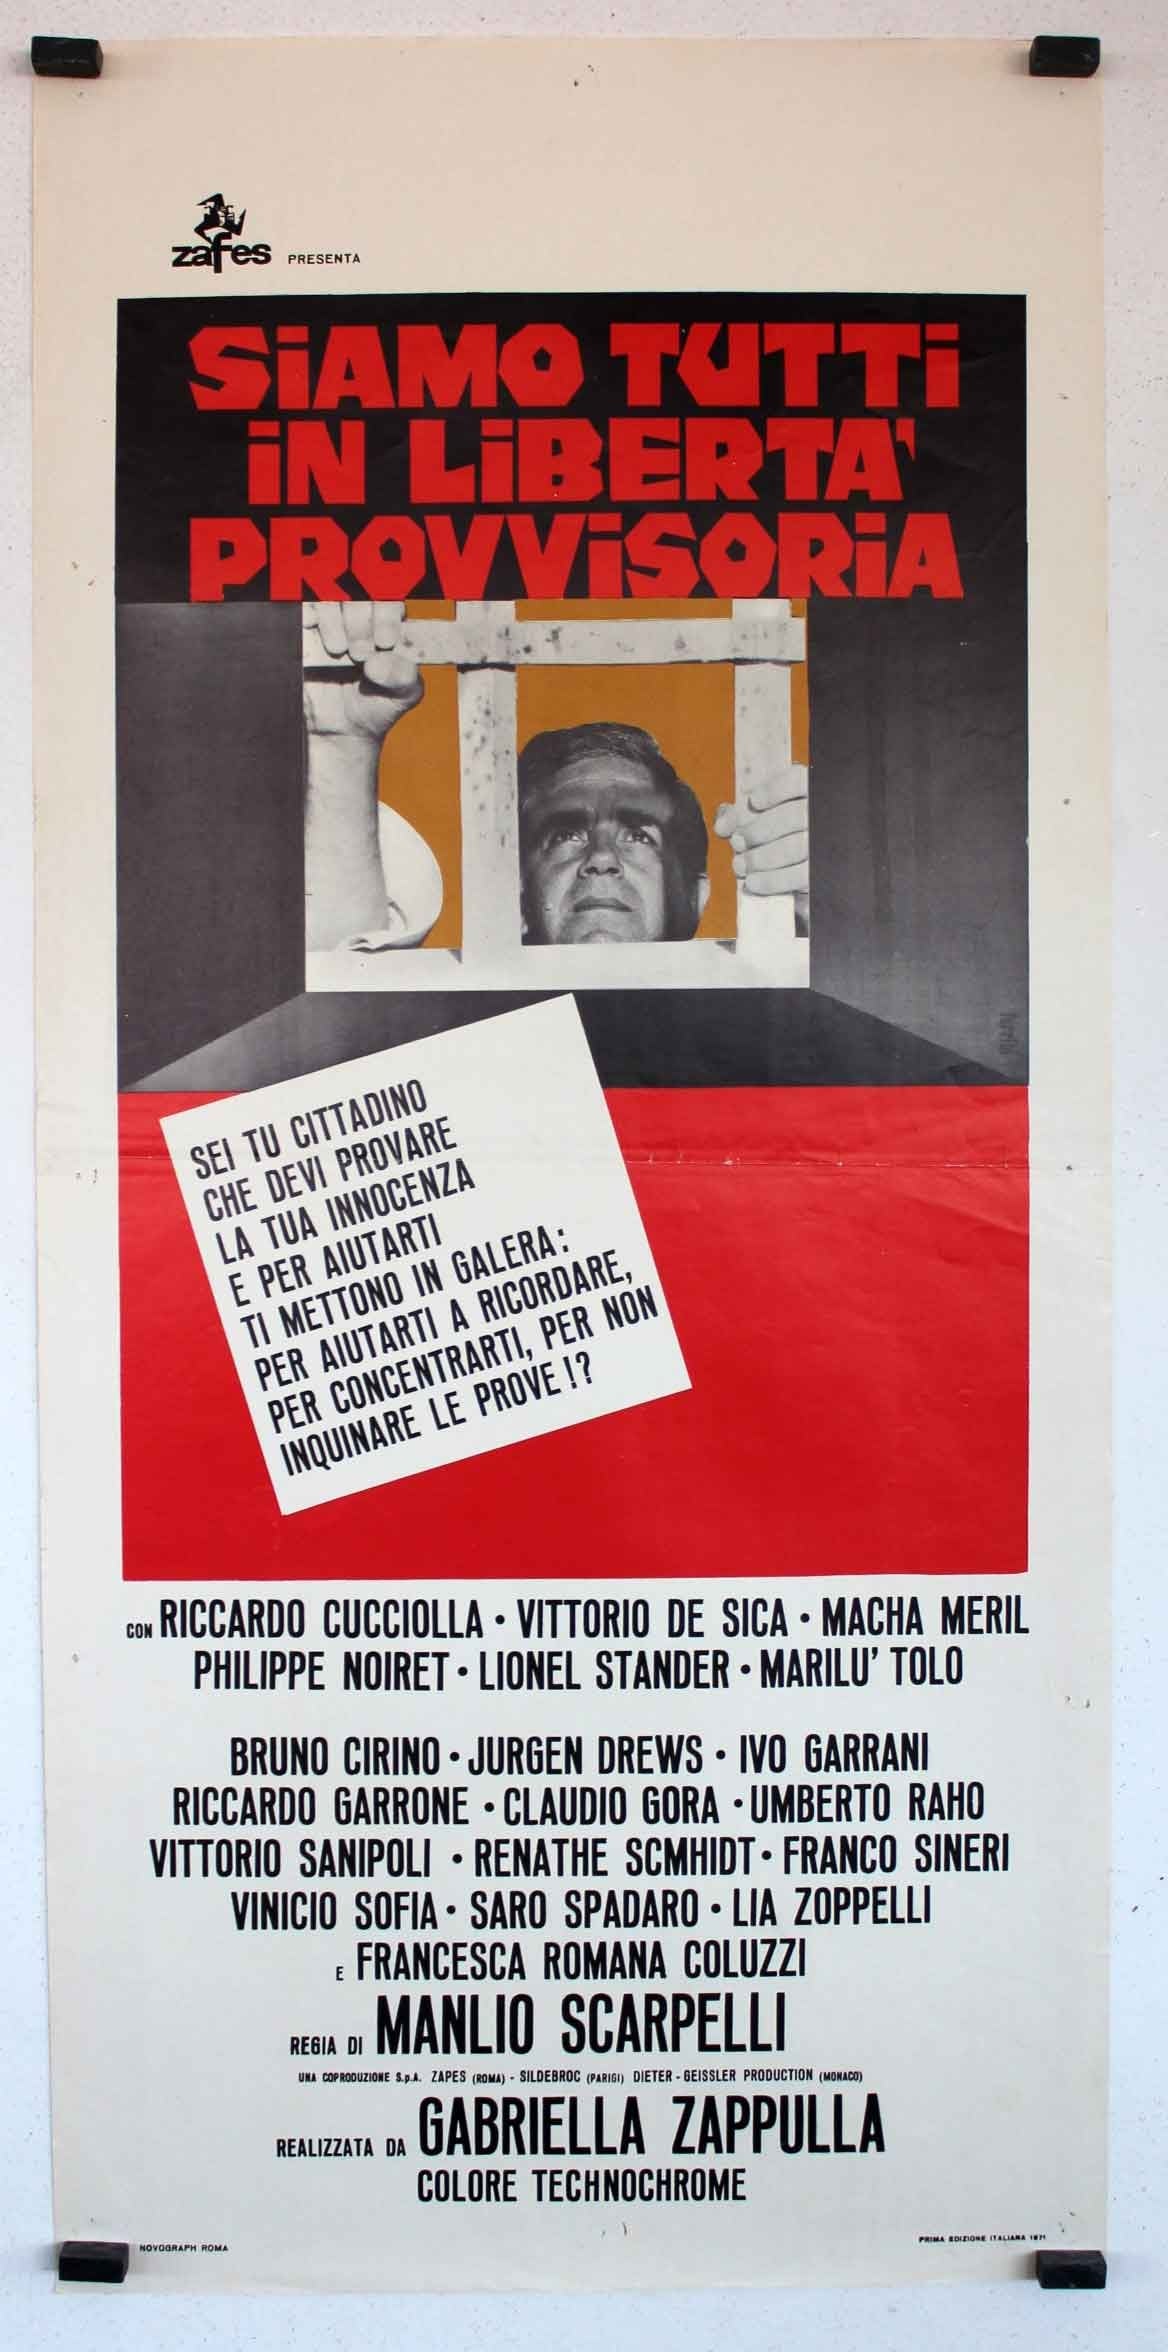 We Are All in Temporary Liberty (1971)